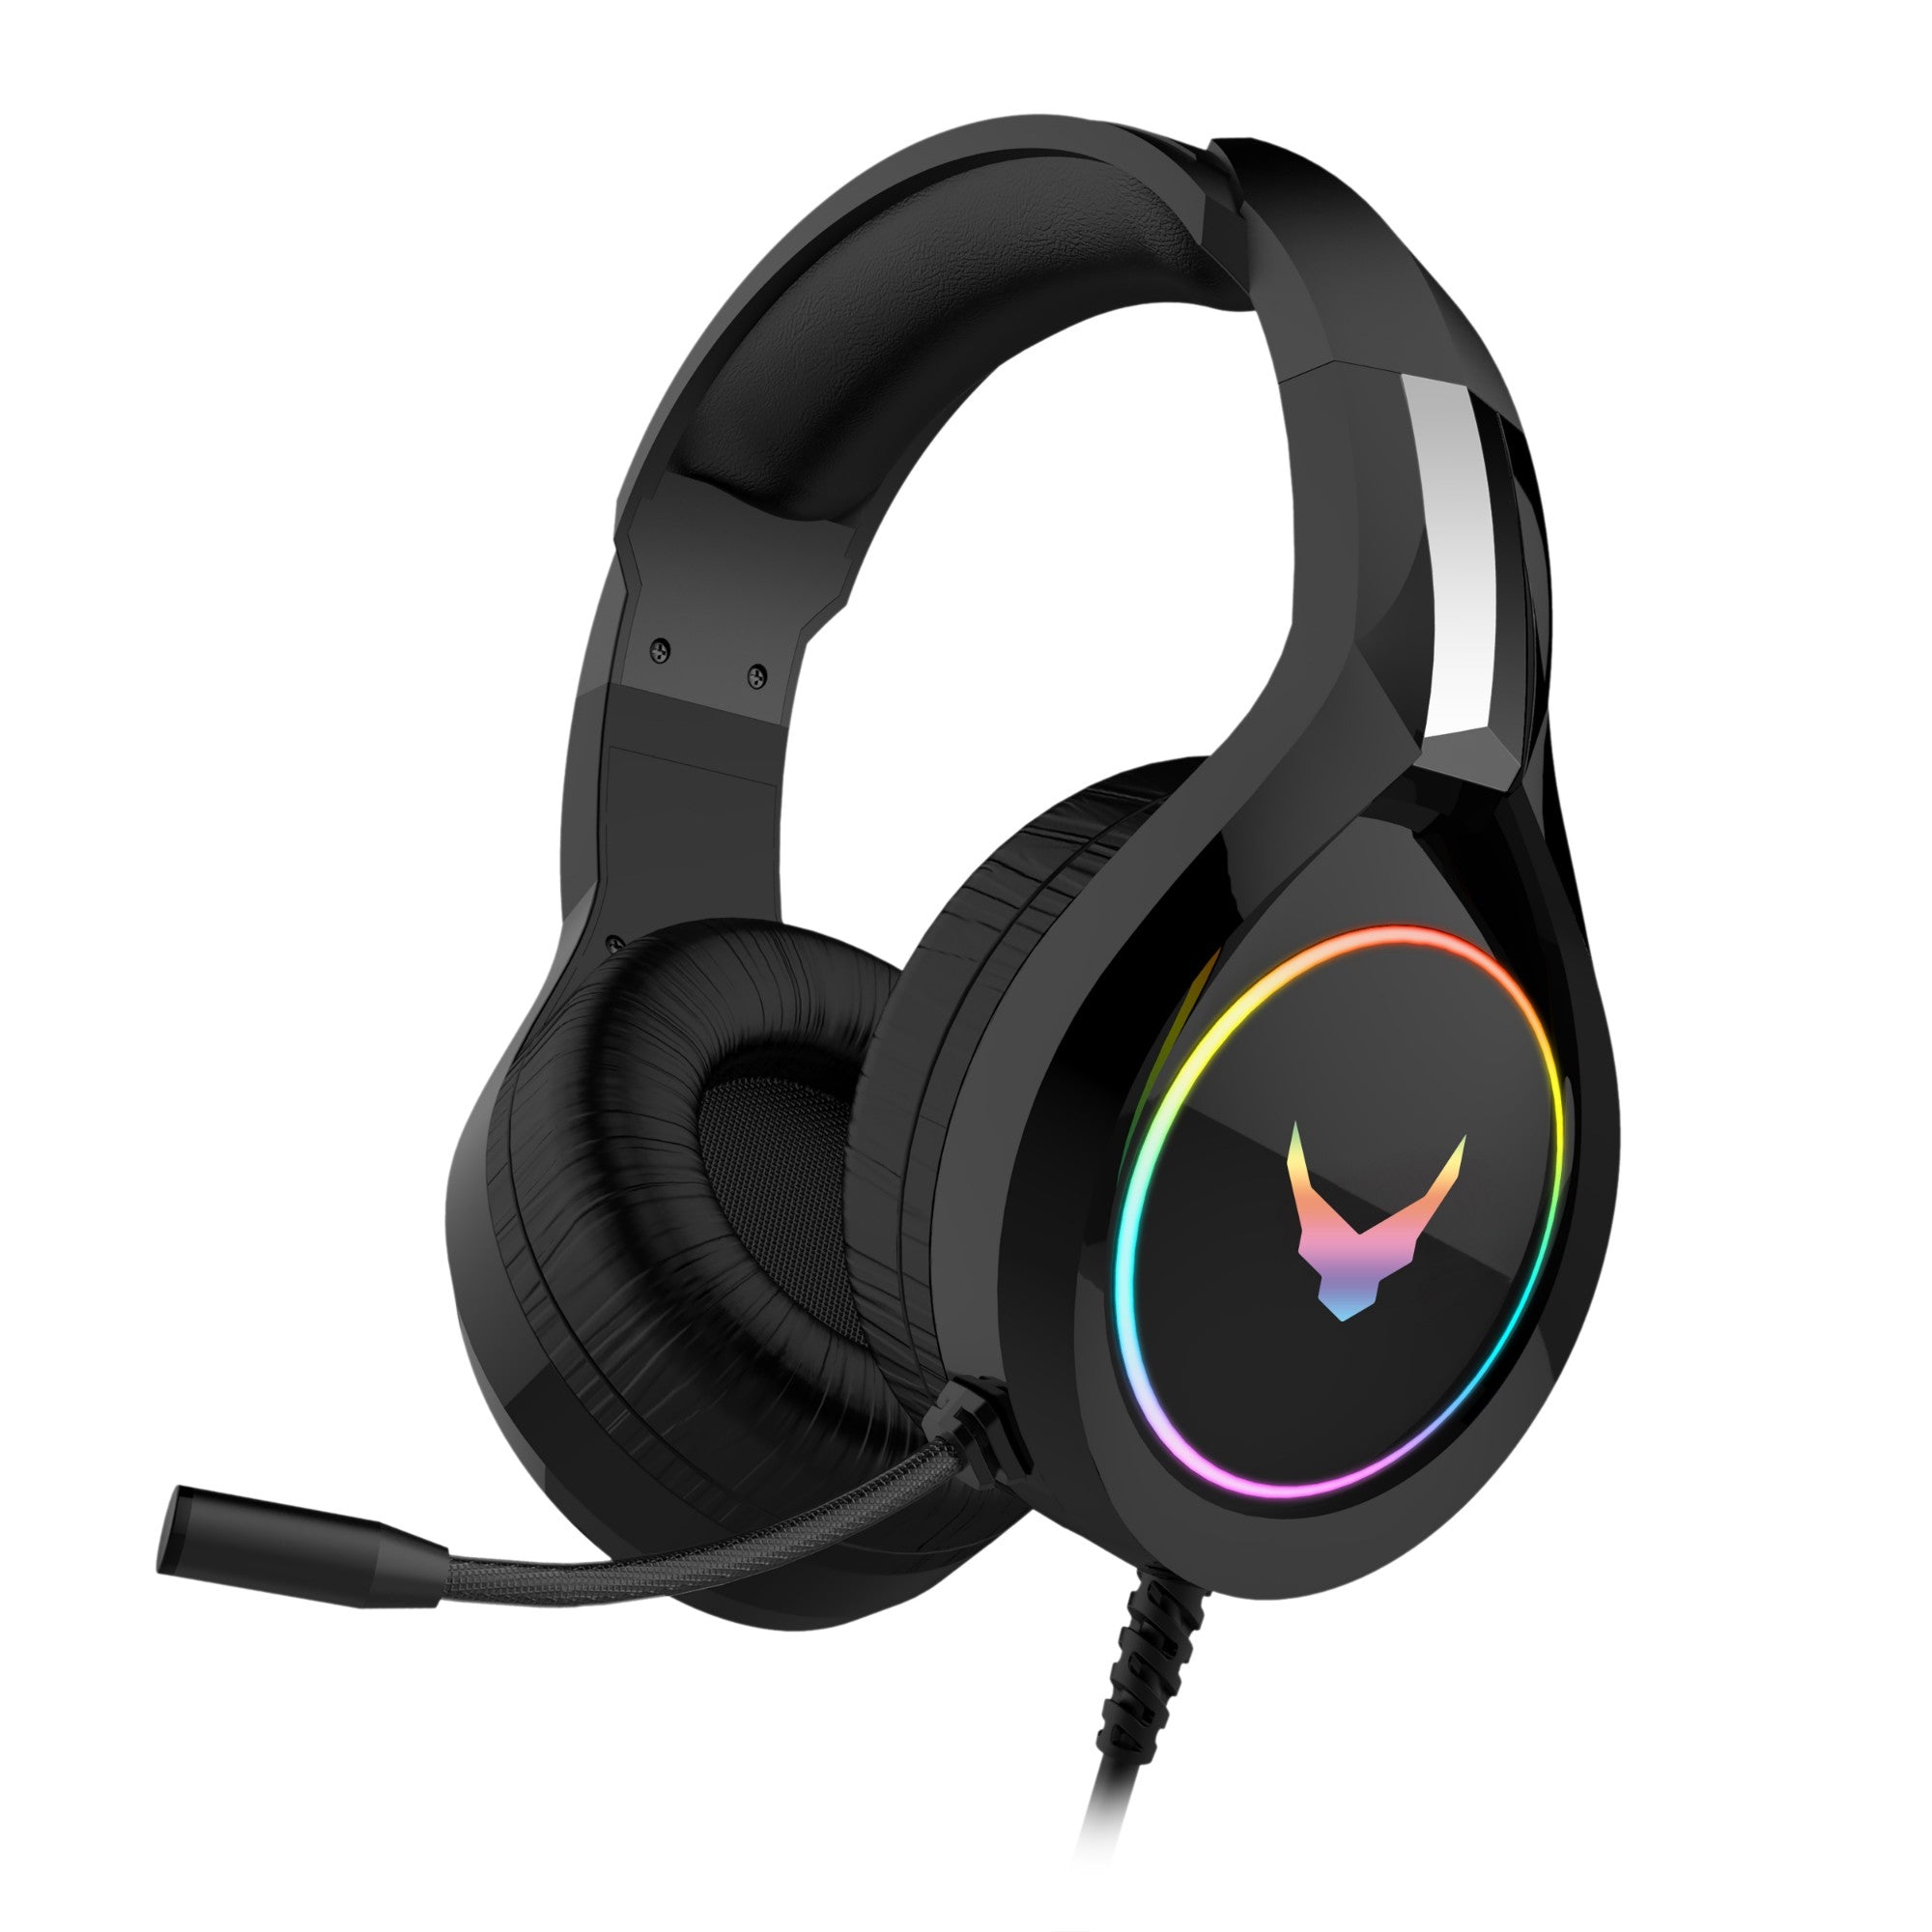 Pro Gaming Headset with RGB Backlight